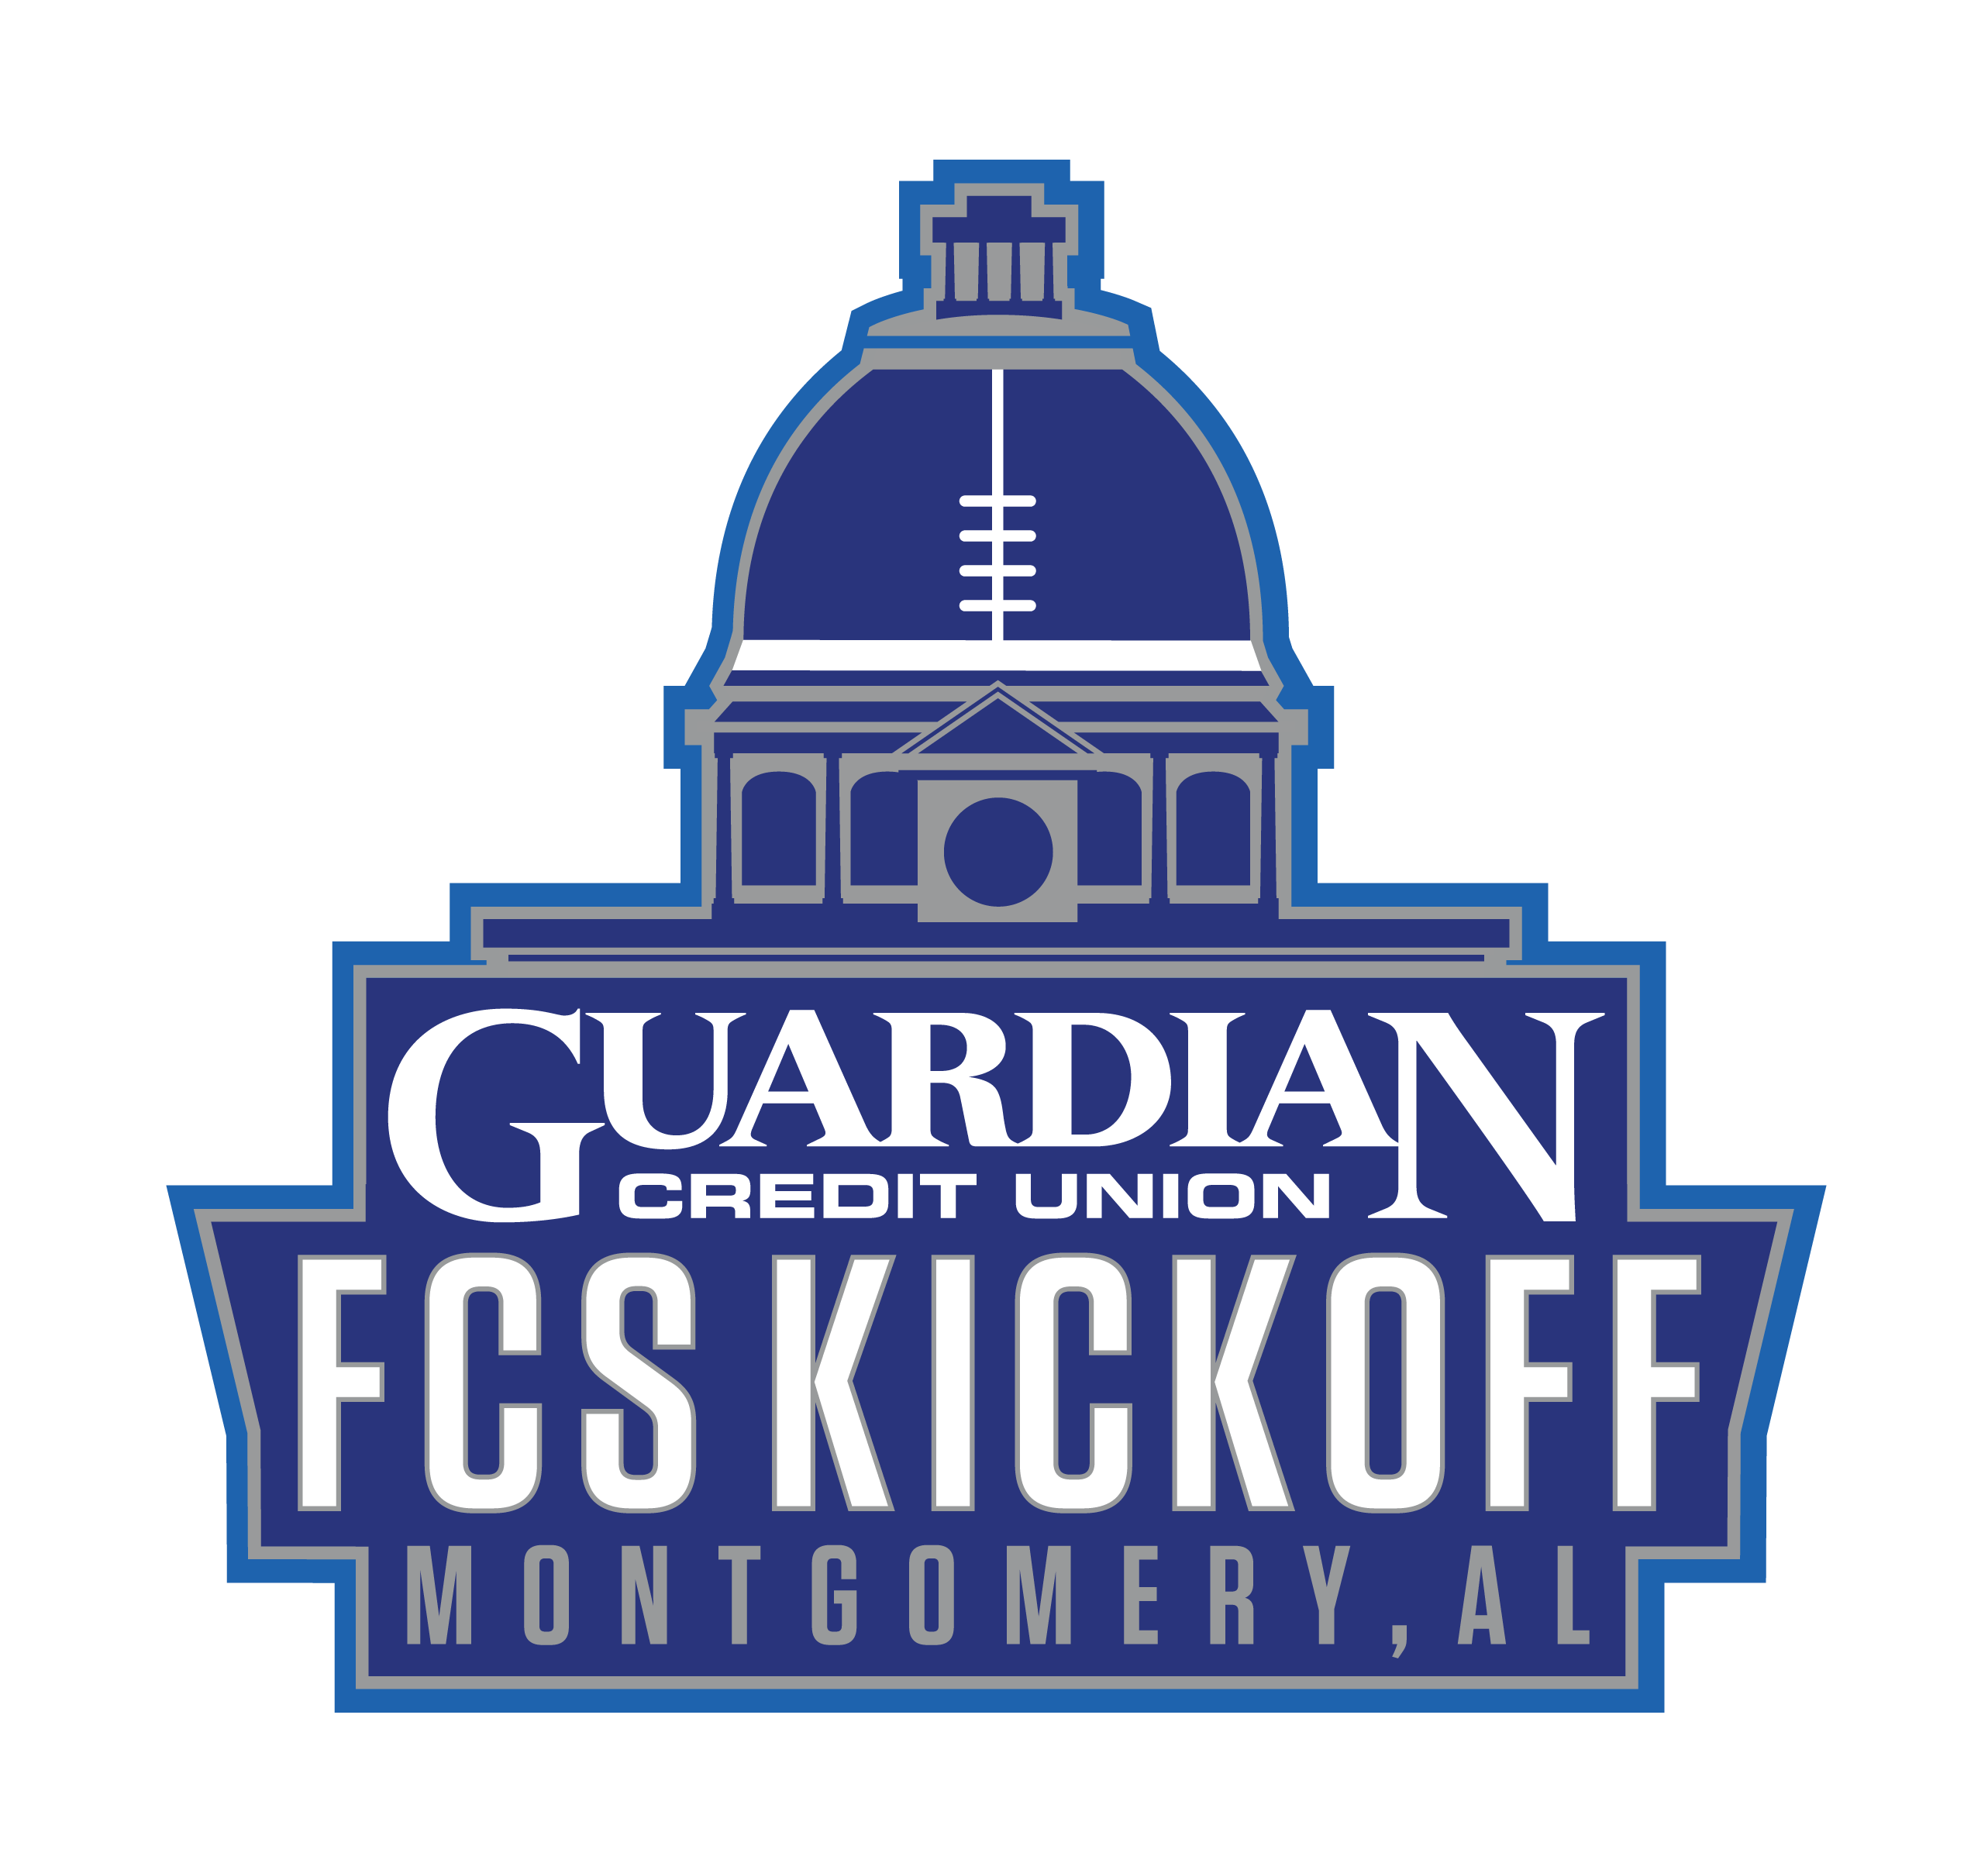 GUARDIAN CREDIT UNION JOINS FCS KICKOFF AS TITLE SPONSOR